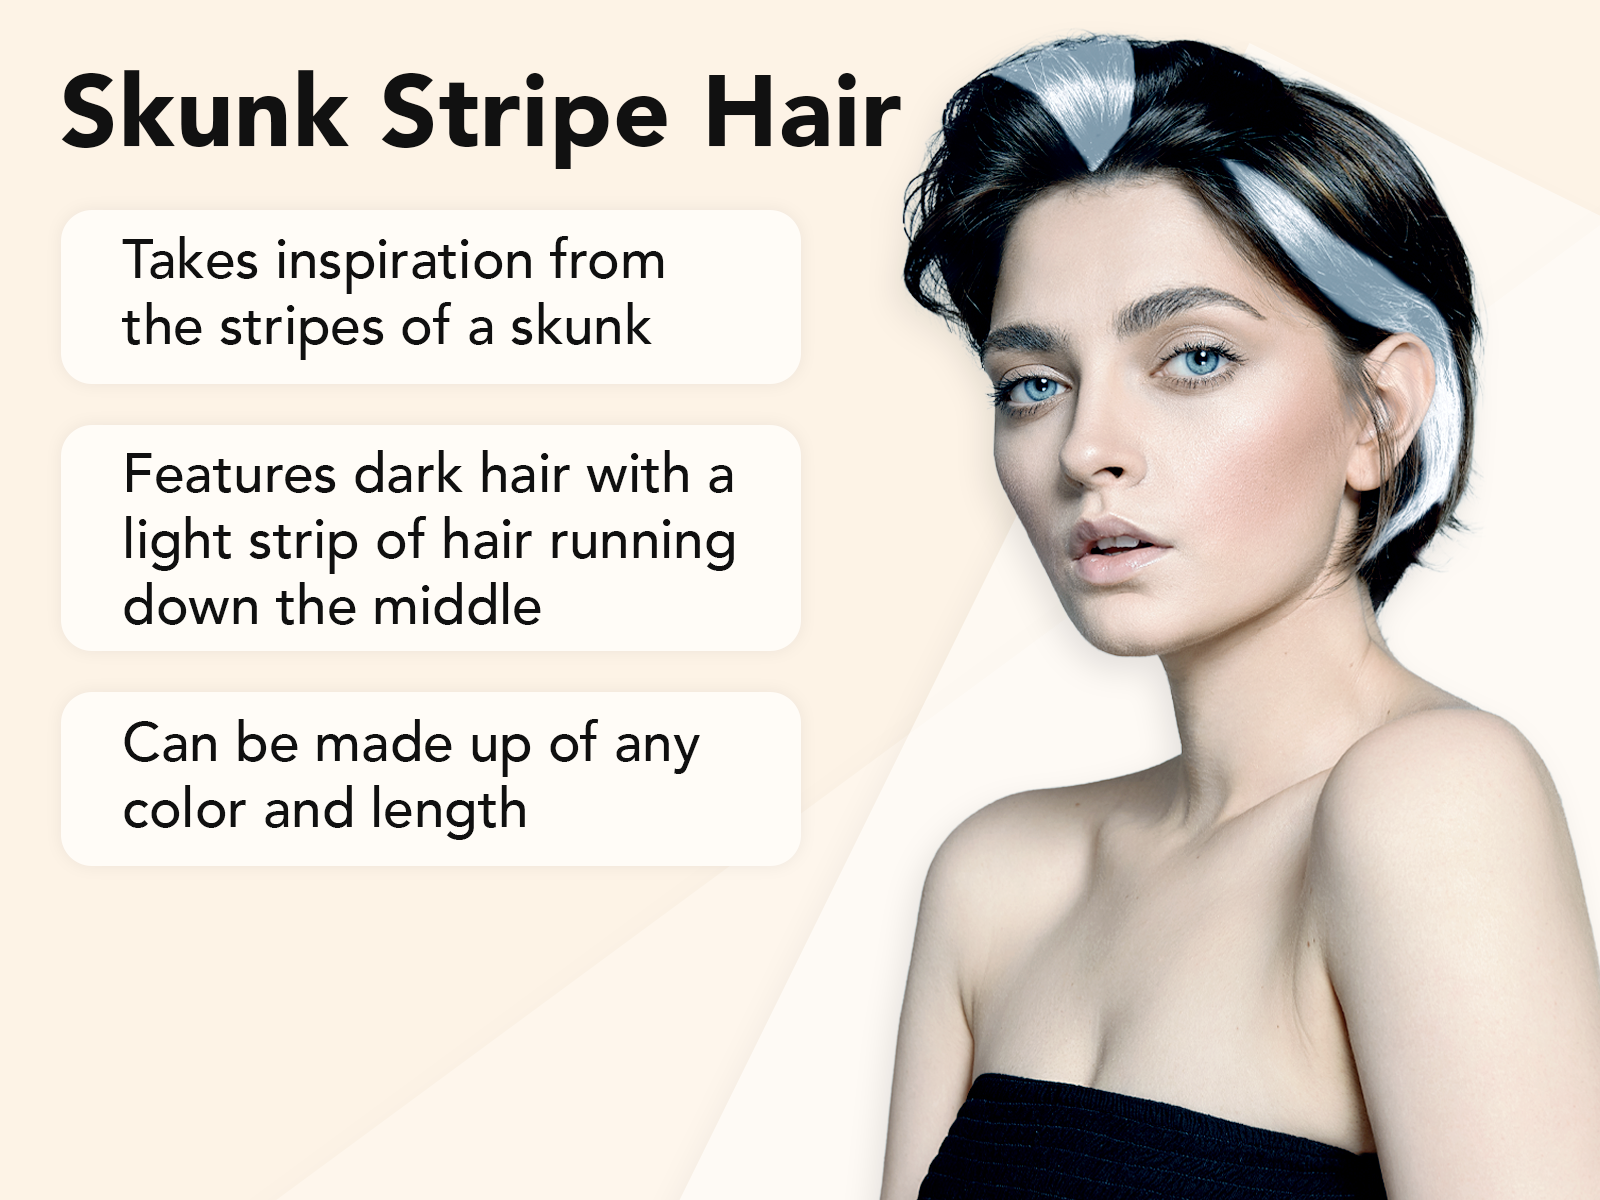 Tan skunk stripe hairstyle image on a tan background explaining the look